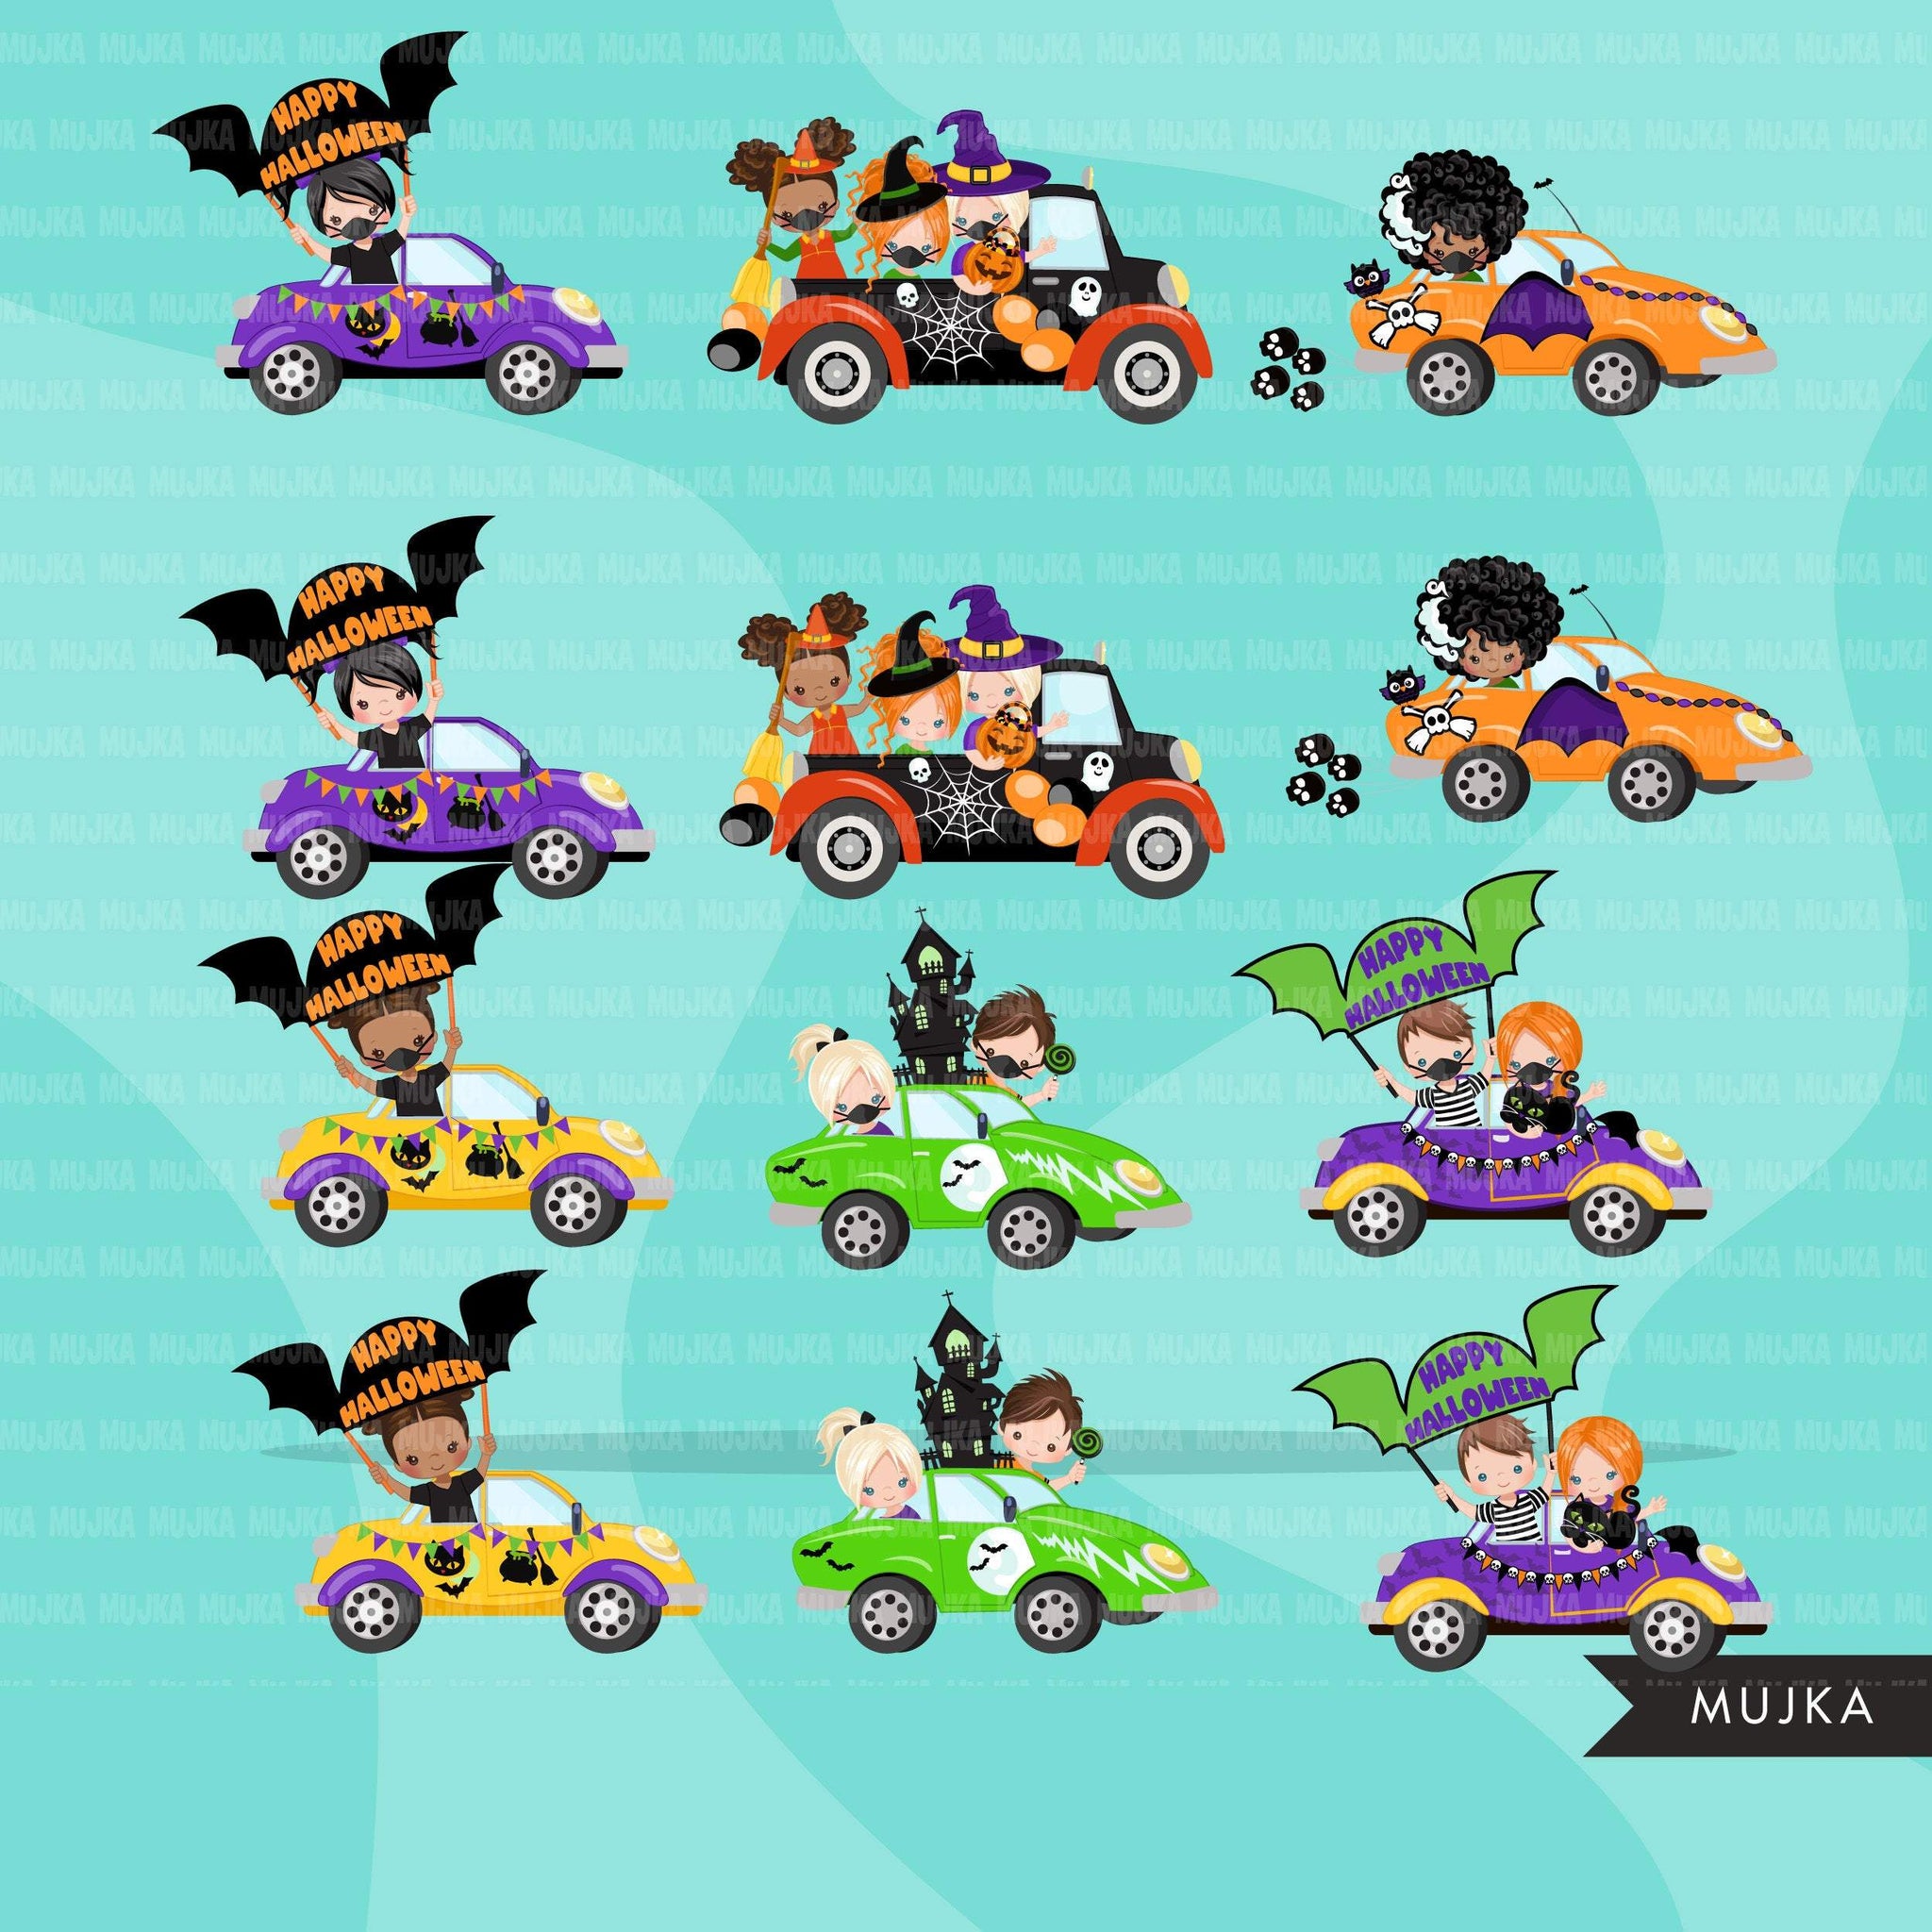 Drive by Halloween Party parade clipart, kids quarantine halloween party, drive through party truck, car graphics, PNG clip art, boys, girls